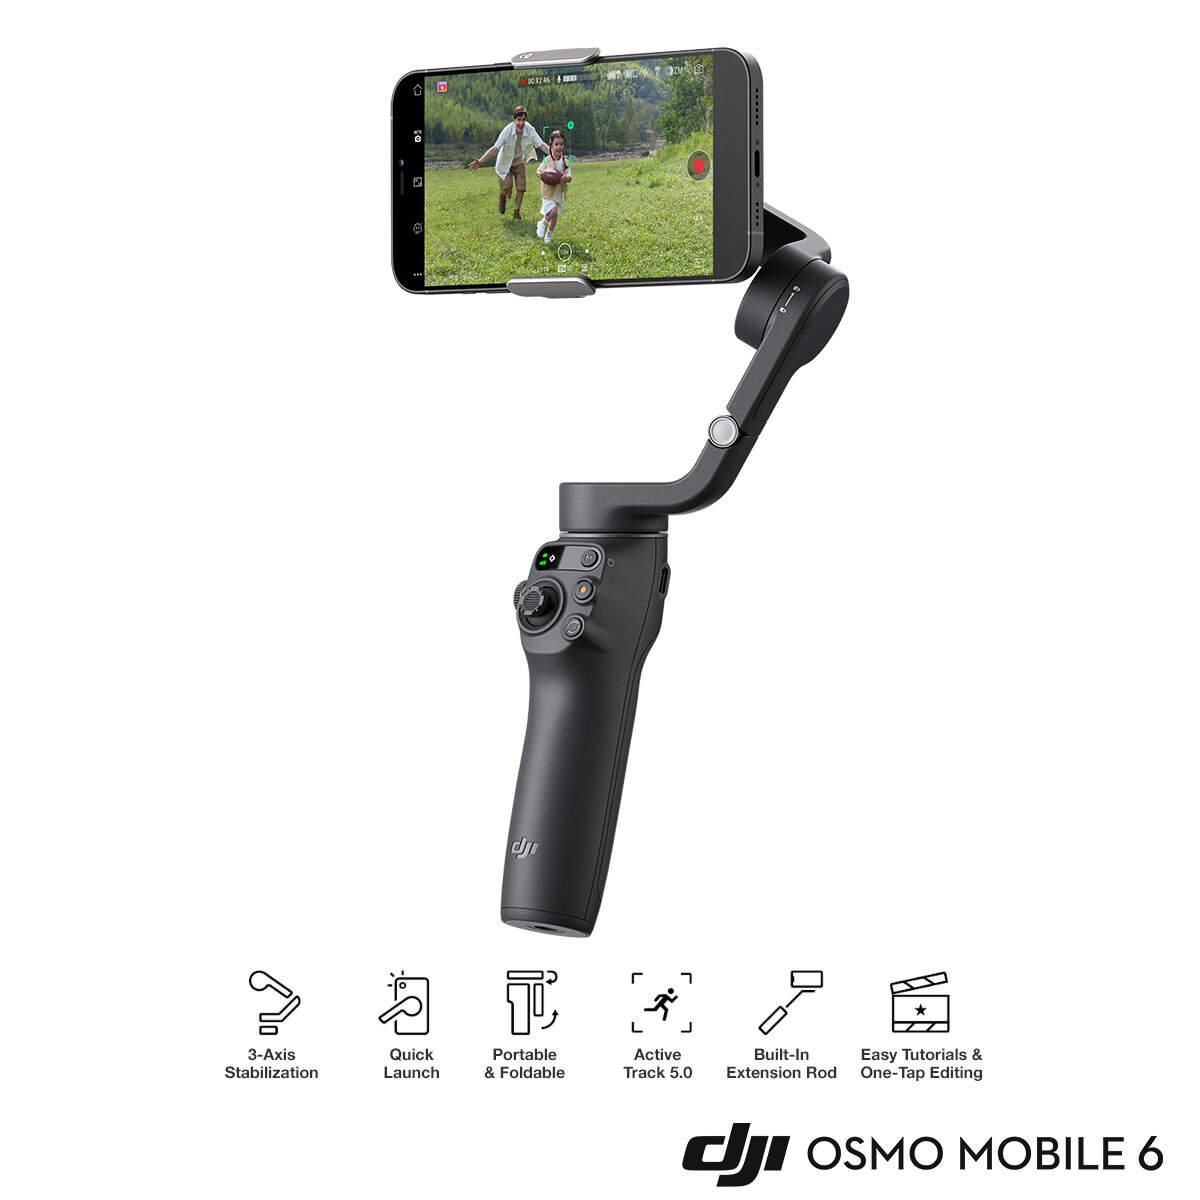 How to use the DJI OSMO MOBILE 6 